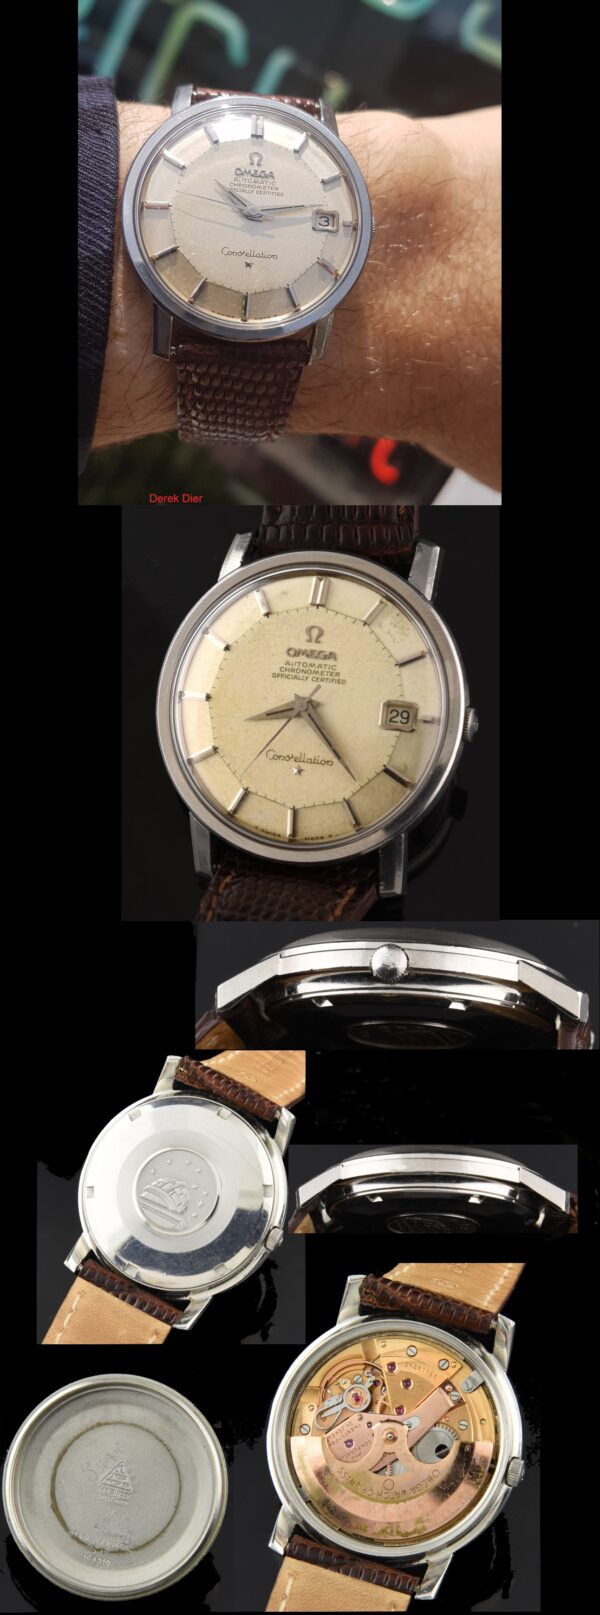 1966 Omega 35mm Constellation stainless steel watch with original pie-pan dial, oversized case, and caliber 564 chronometer-grade movement.